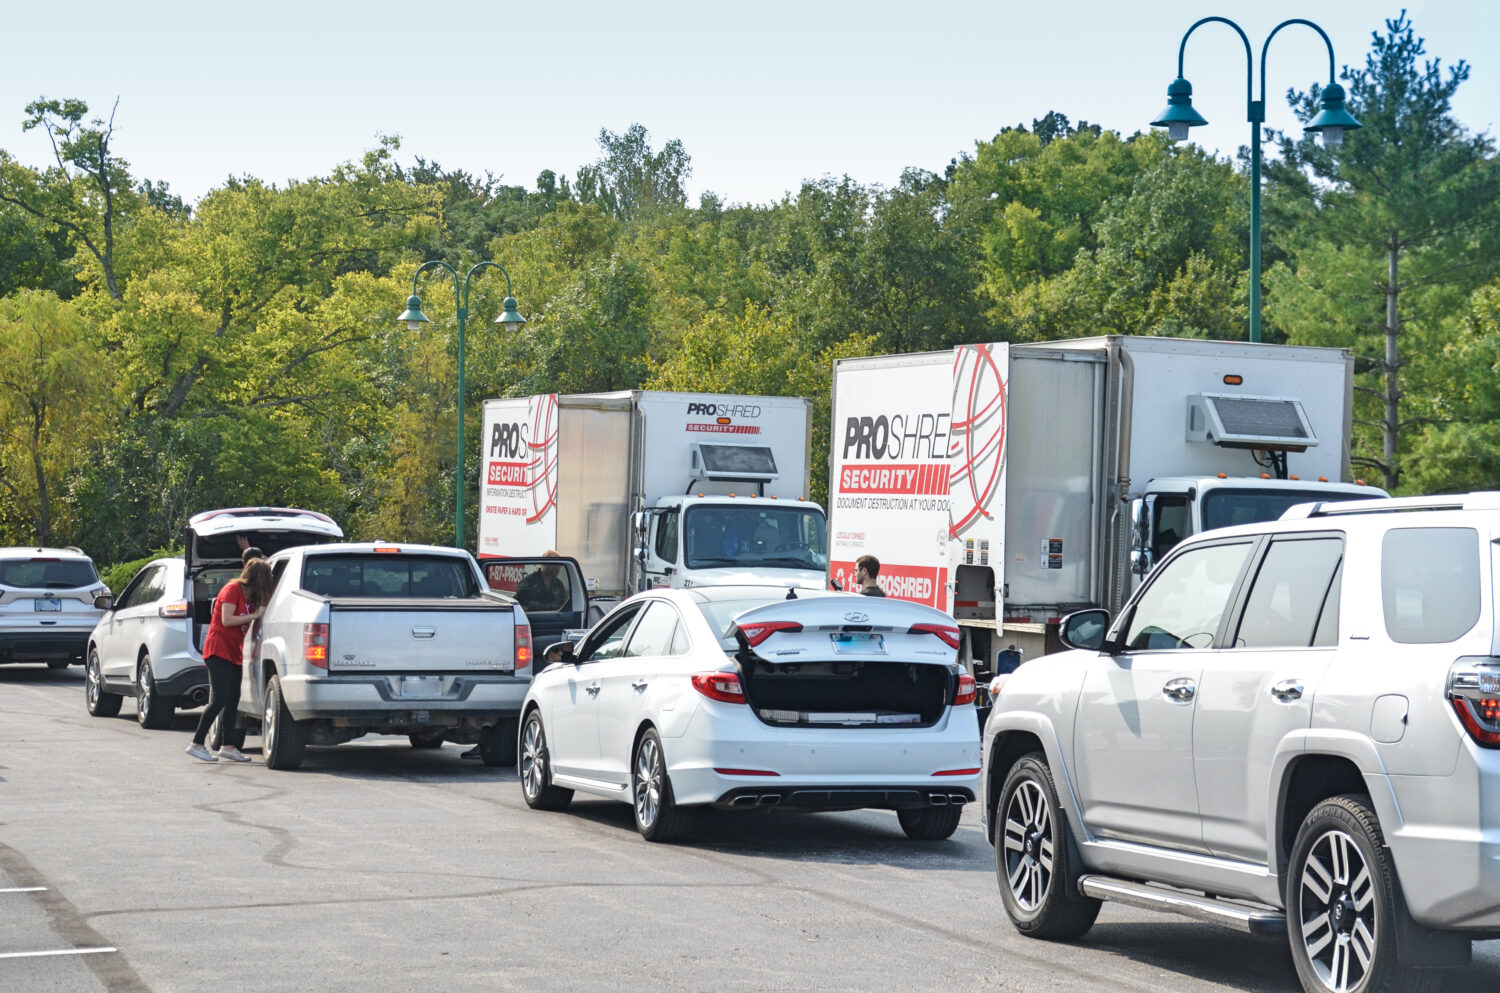 Cars in line at 2019 Shred Day in Leawood Office parking lot.